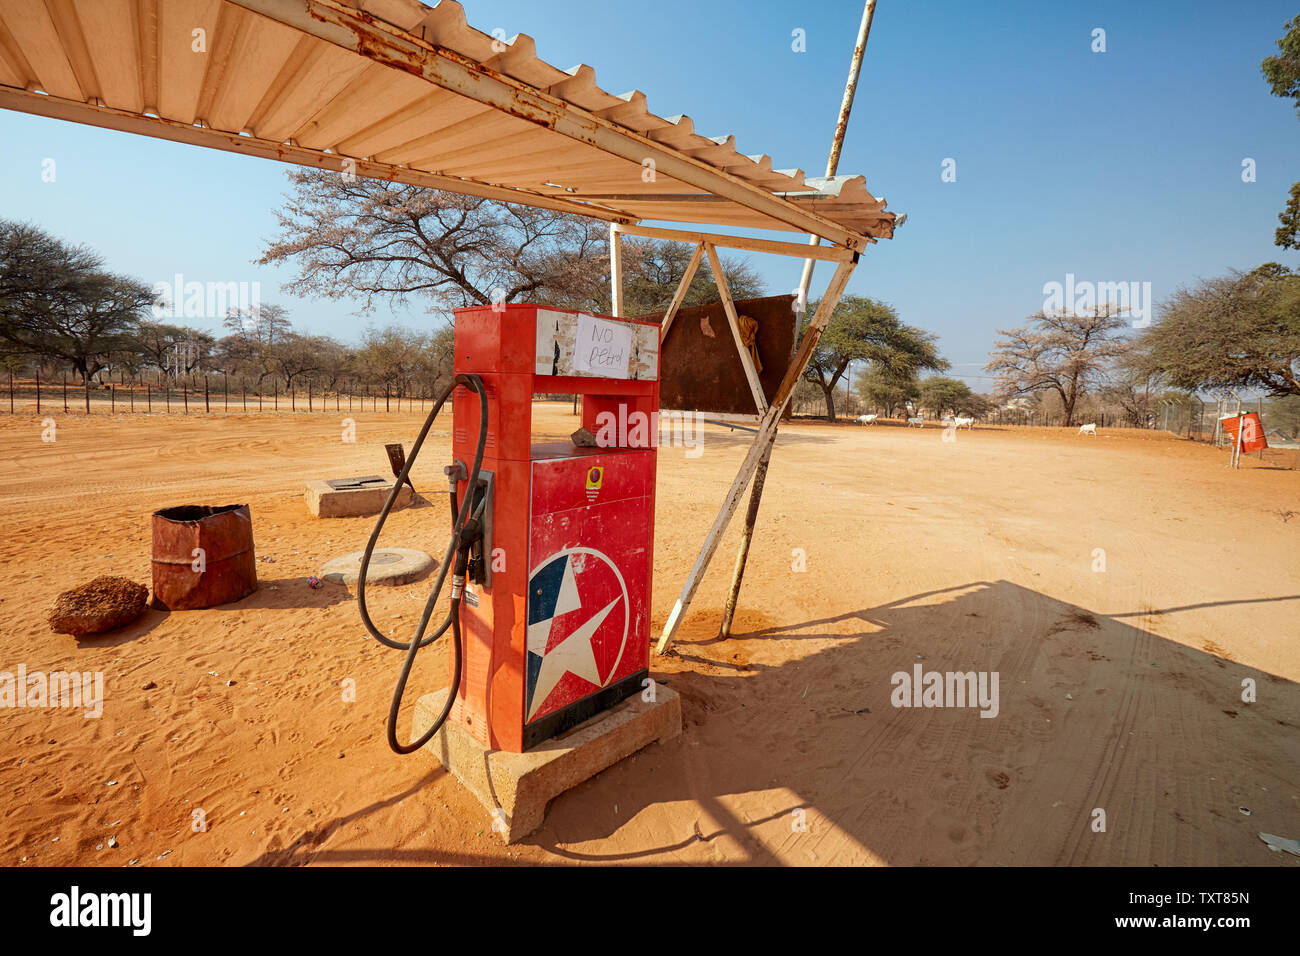 Gas station with “No Petrol” sign in Epukiru in Namibia in Africa Stock Photo